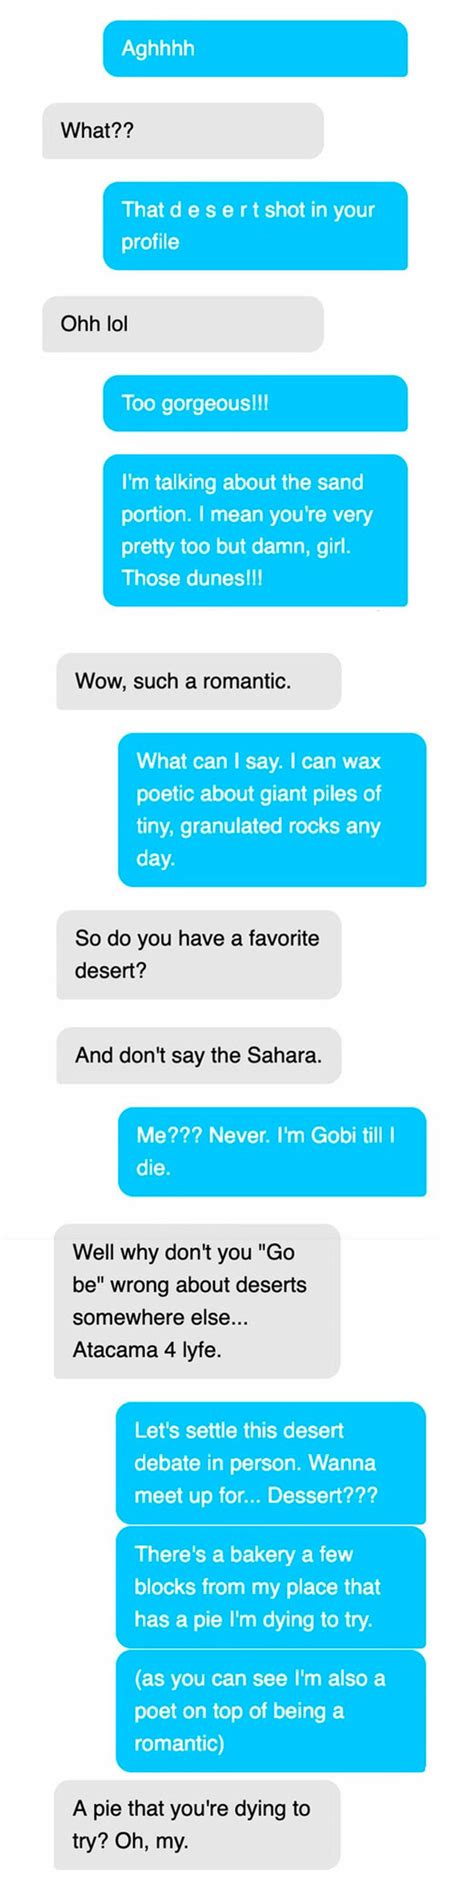 nice ways to start a conversation on tinder how to and guide